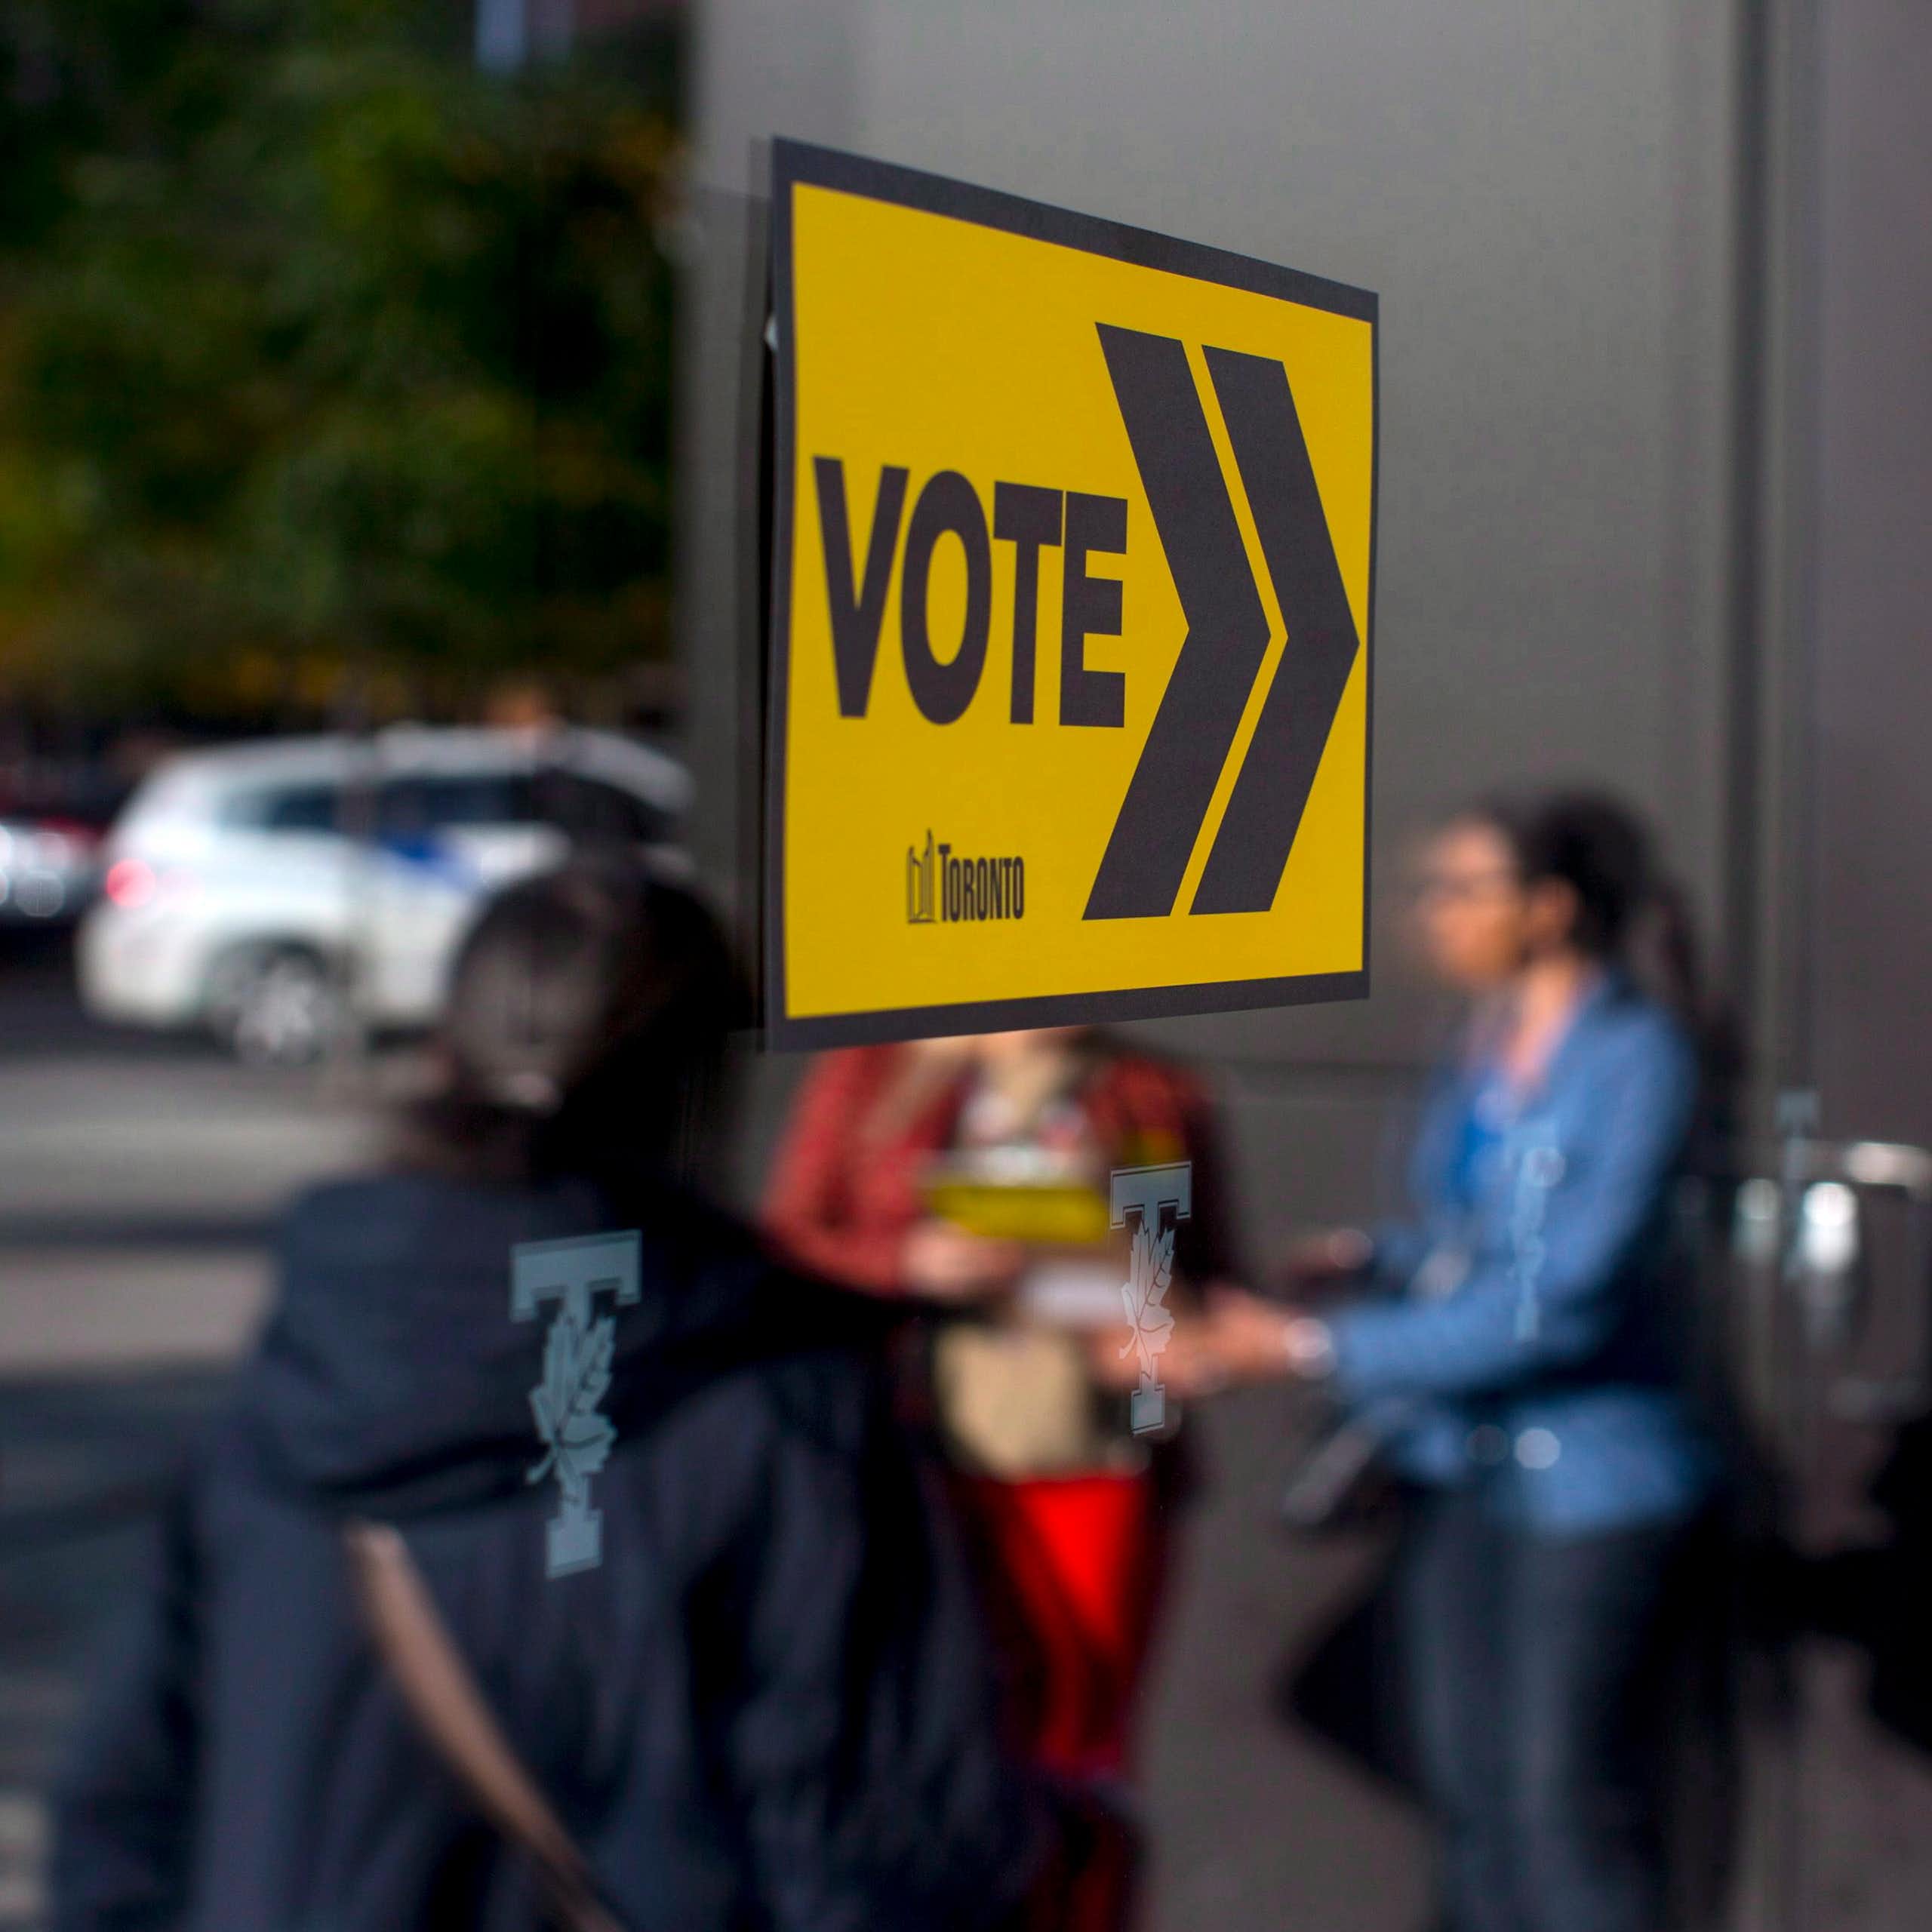 A yellow Vote sign is attached to glass; voters are reflected in the glass.